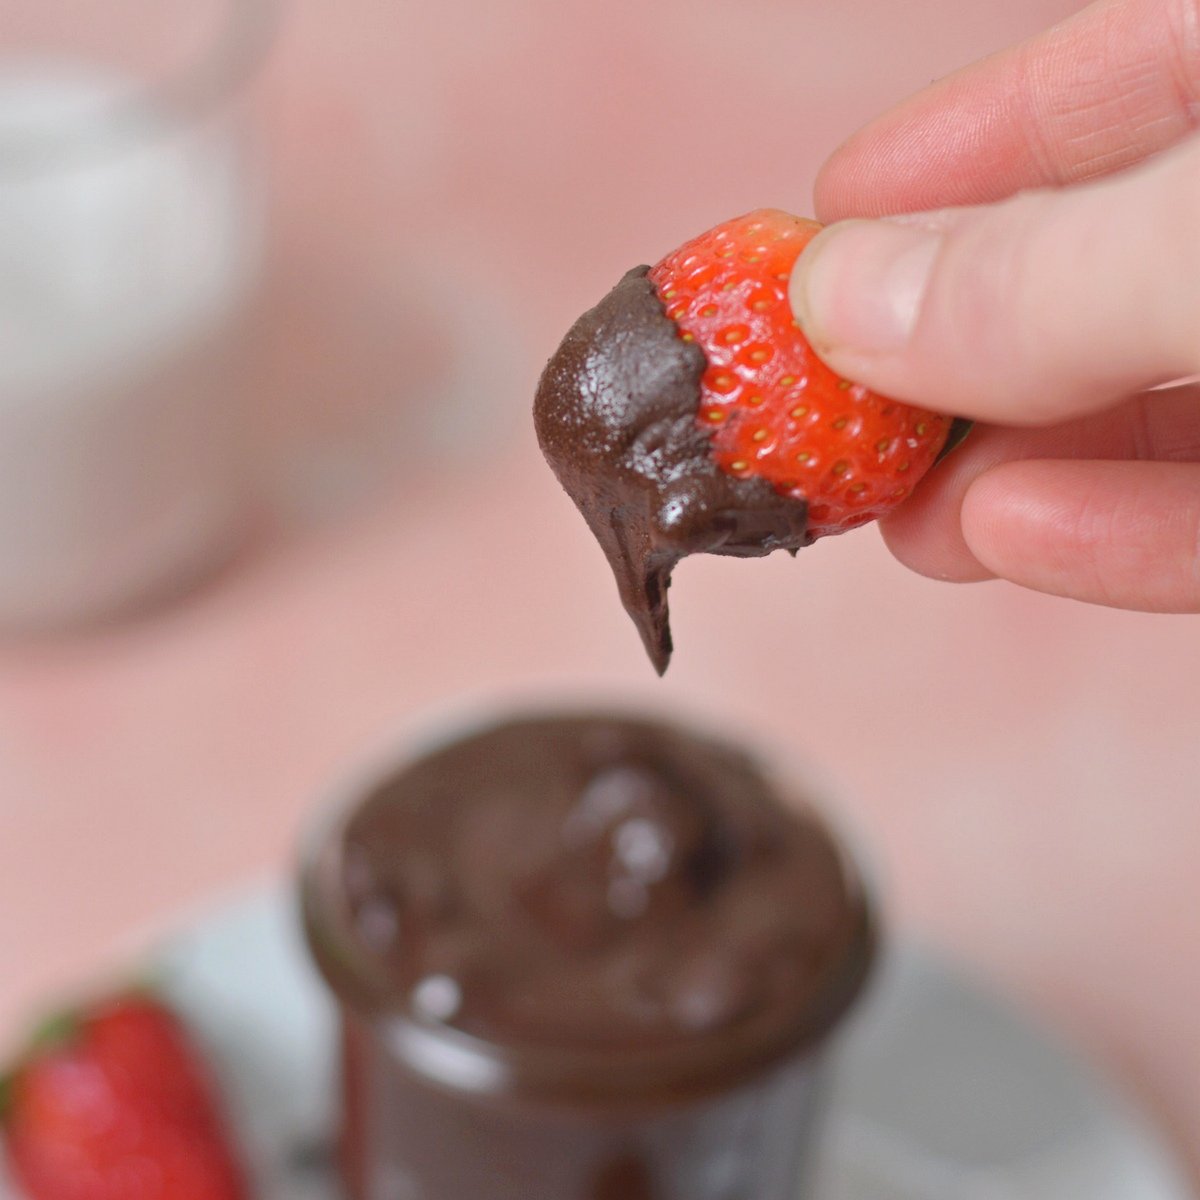 A strawberry being dipped into the protein brownie batter.